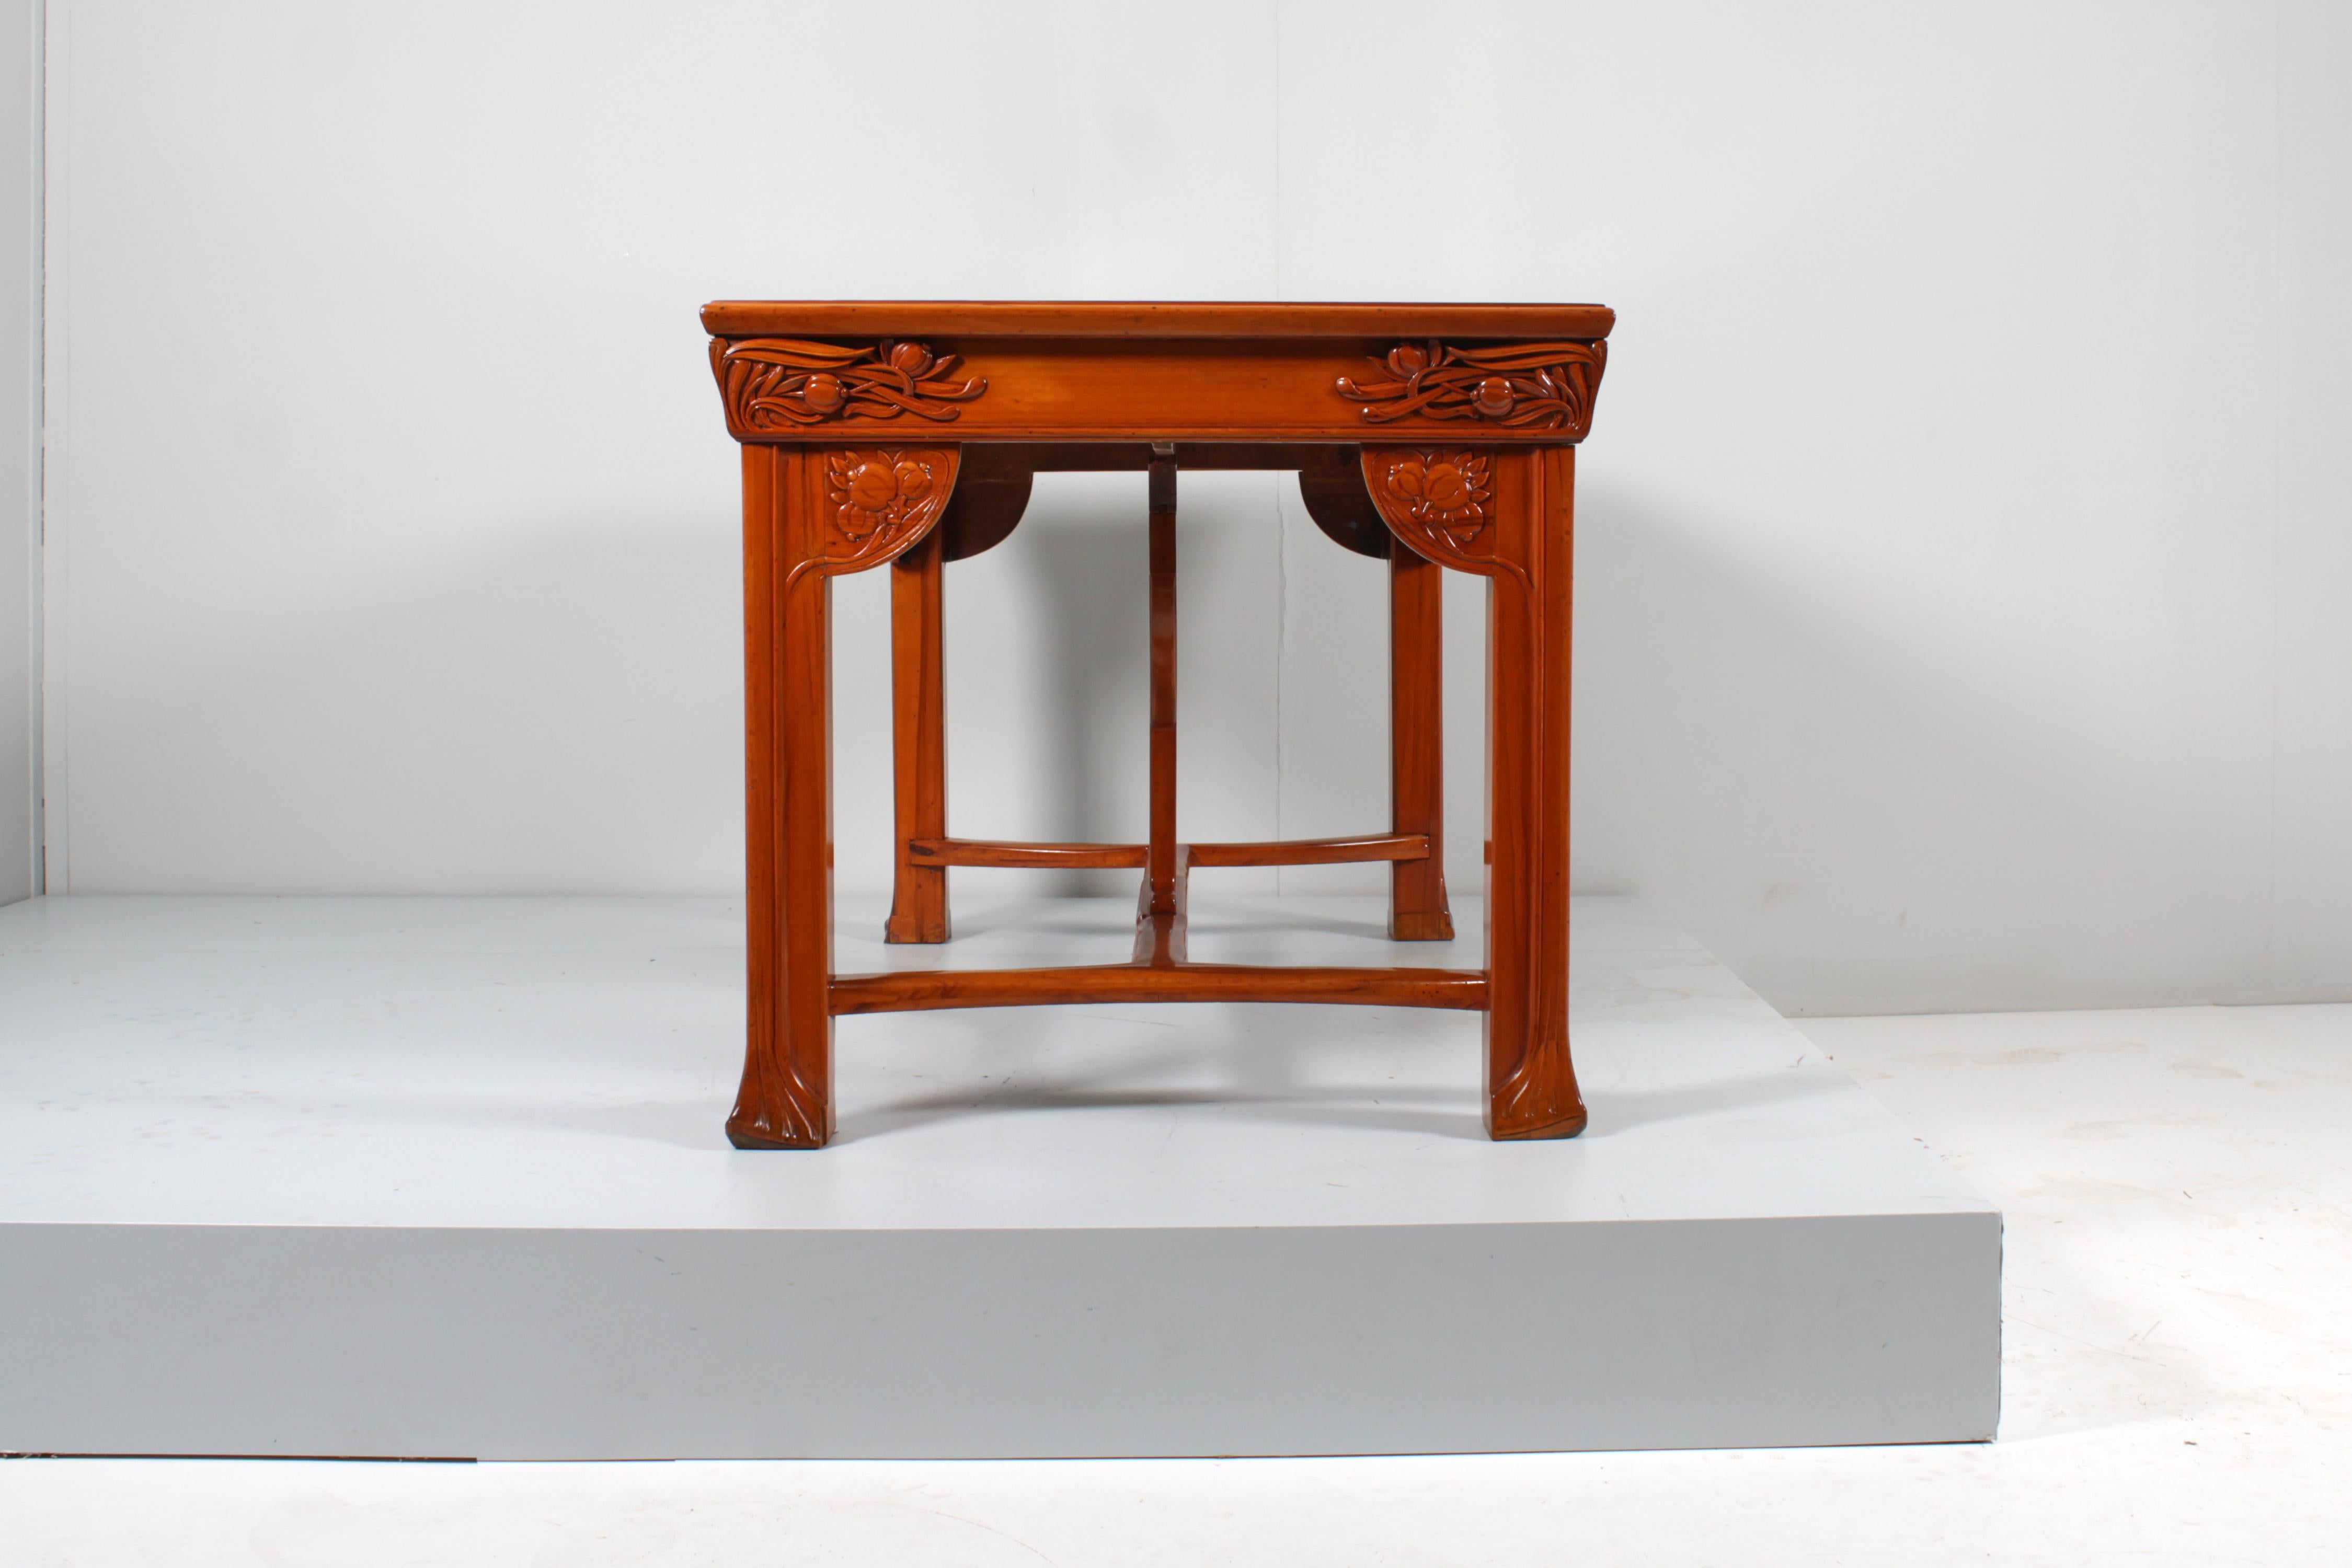 Art Nouveau V. Ducrot Restored Inlaid and Carved Wood Table 1900 Italy For Sale 4